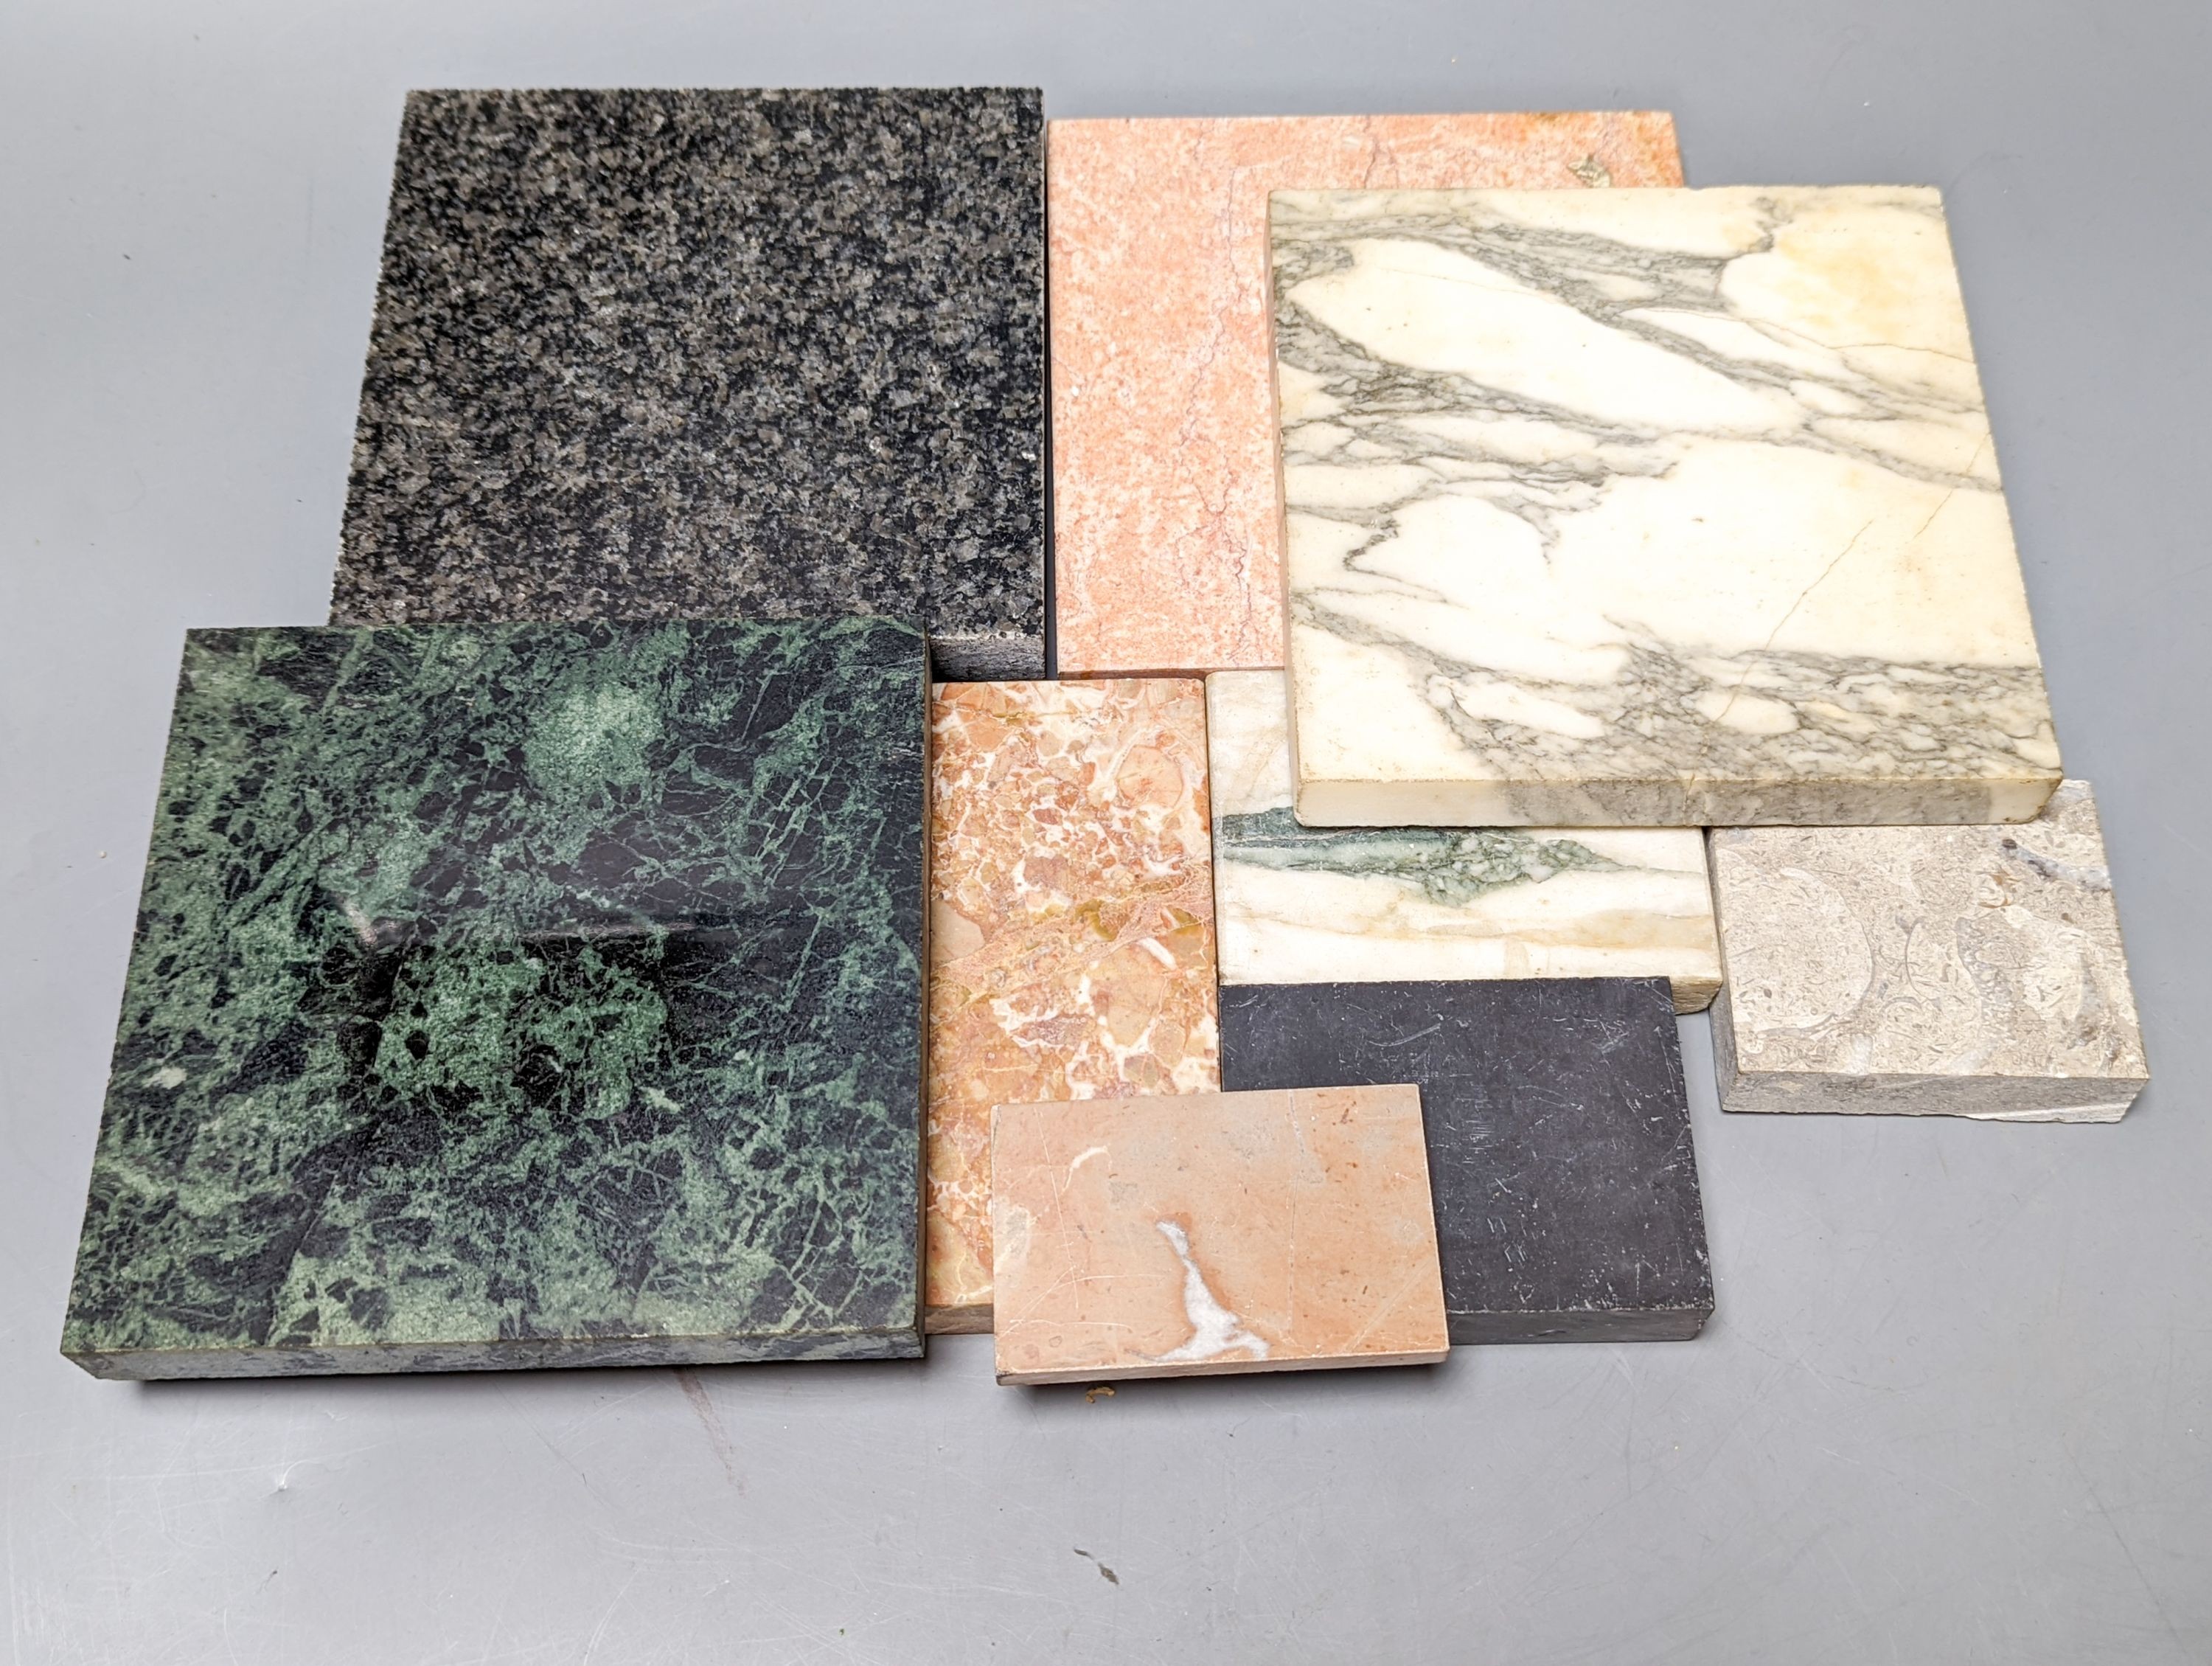 A group of cut stone samples, including marble and granite